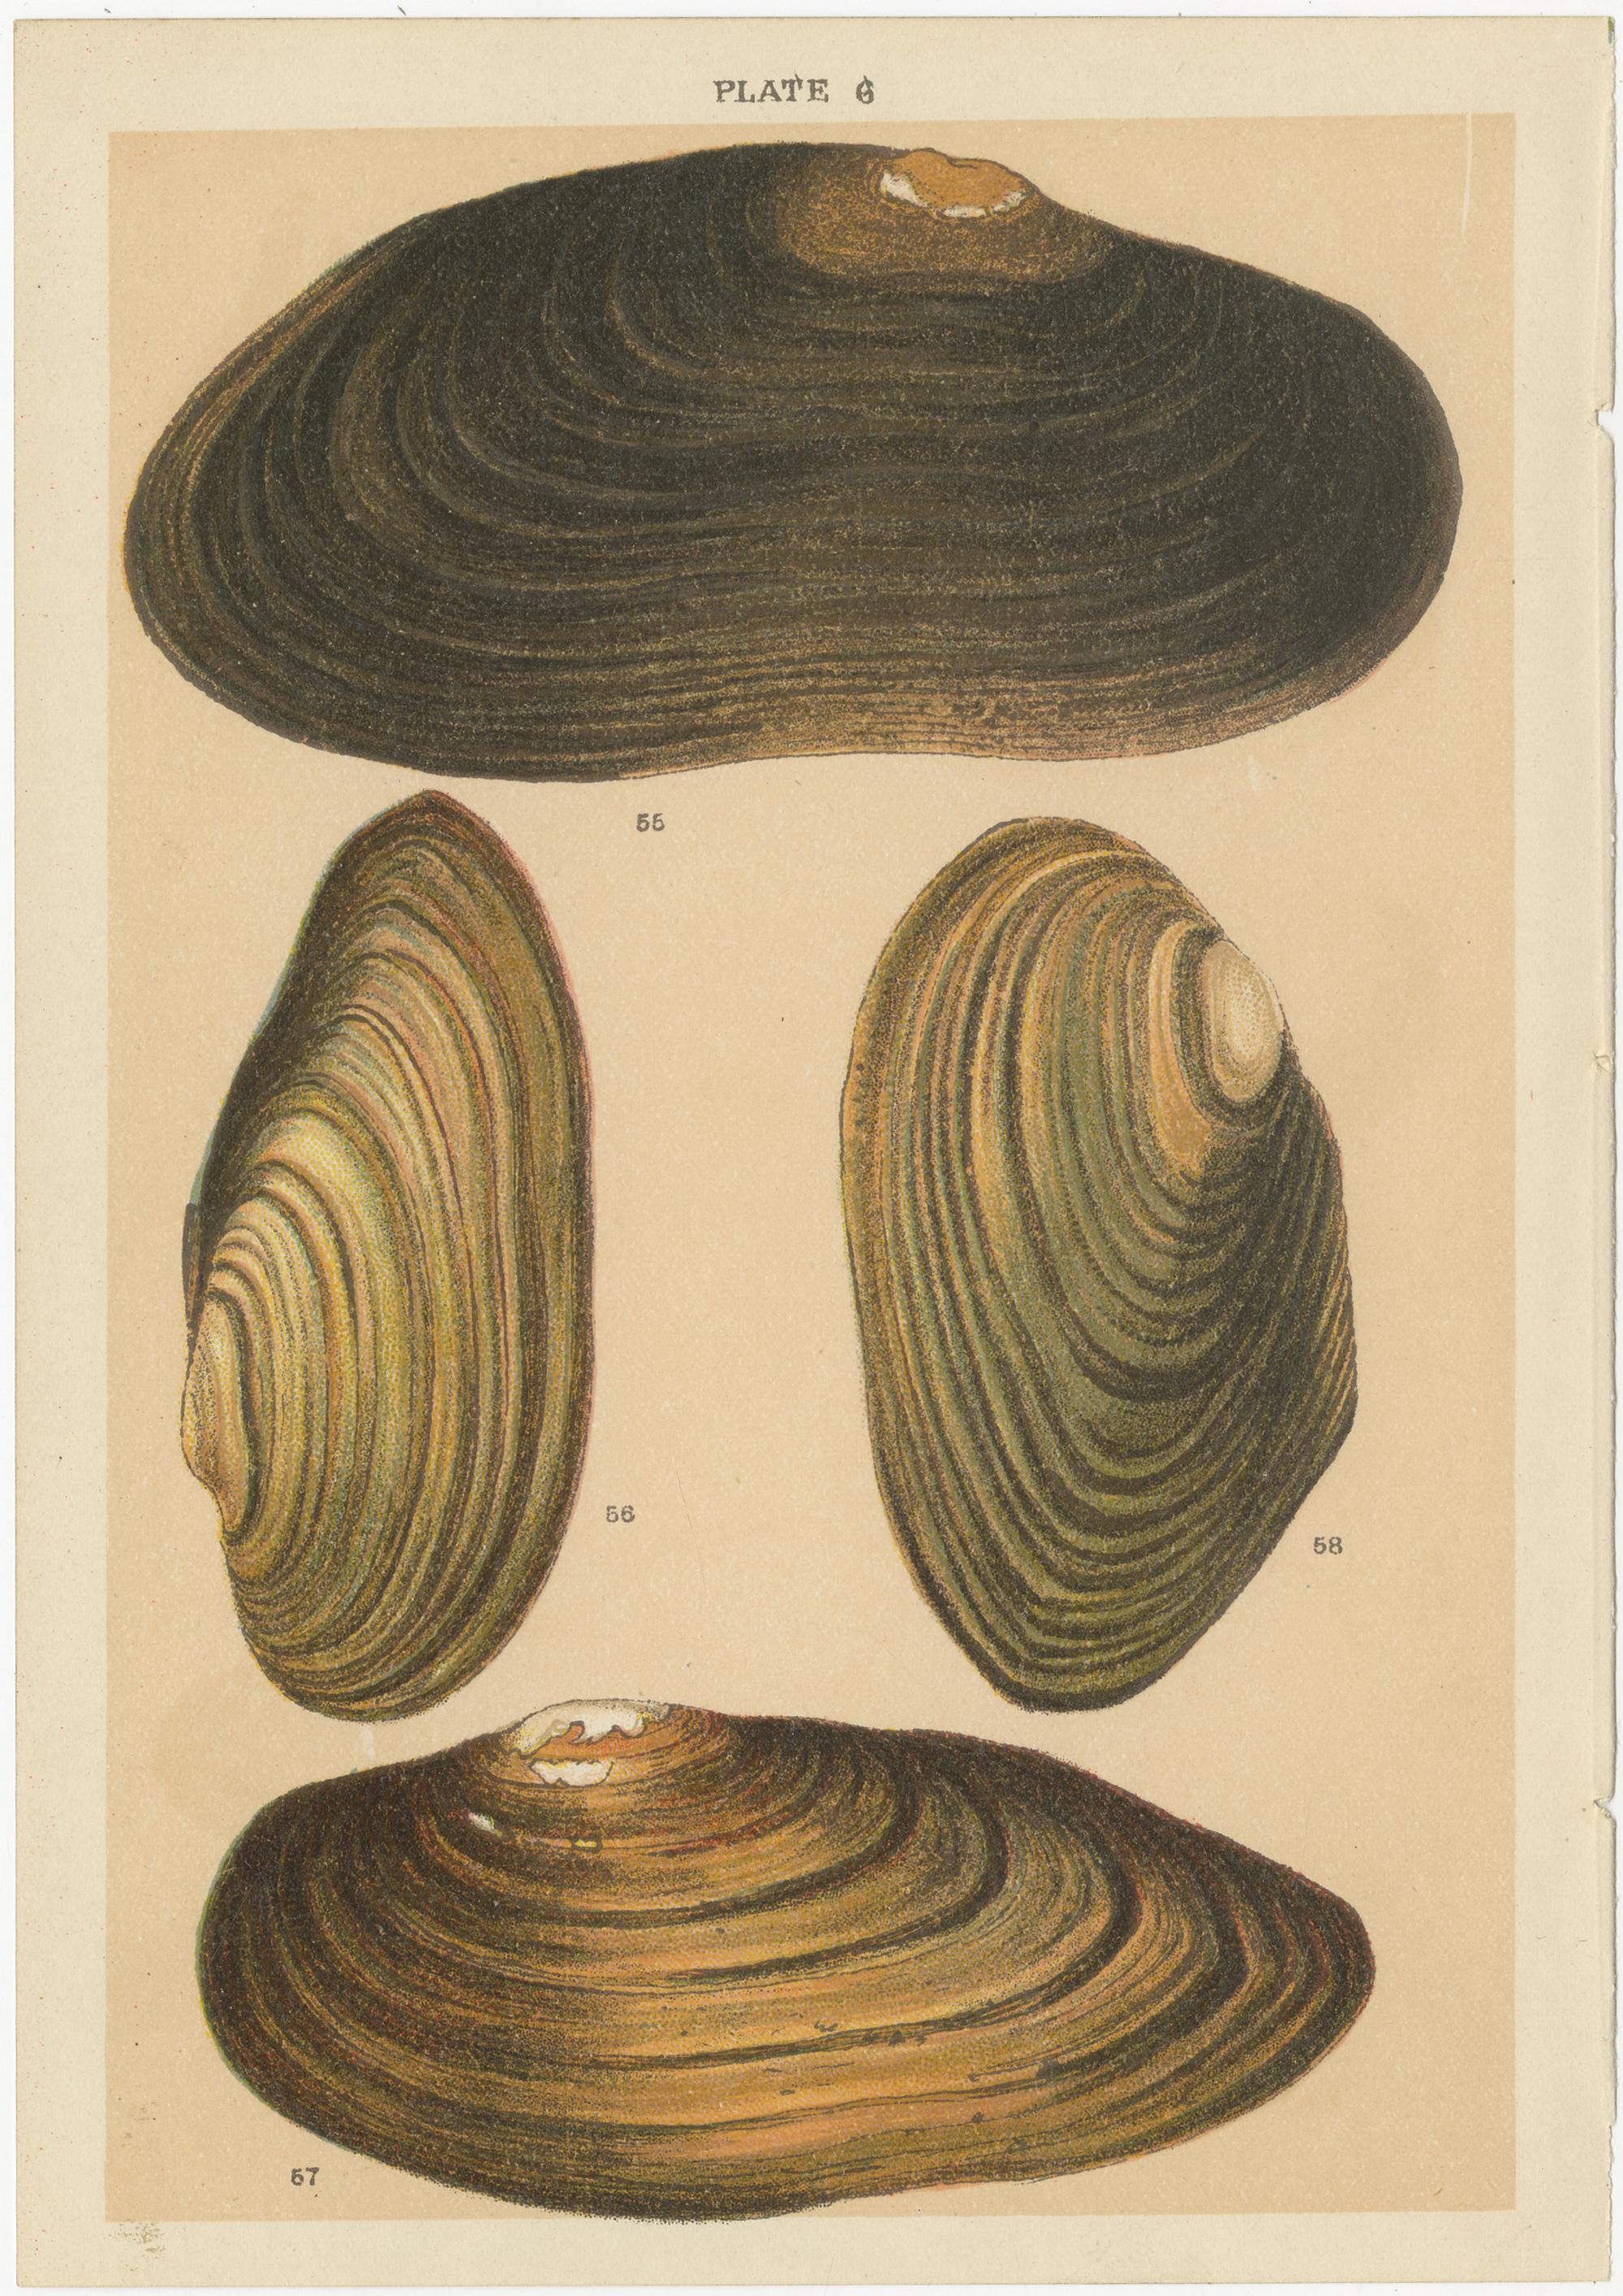 Set of 10 Antique Prints of Shells Including Molluscs by Gordon 'circa 1900' For Sale 6